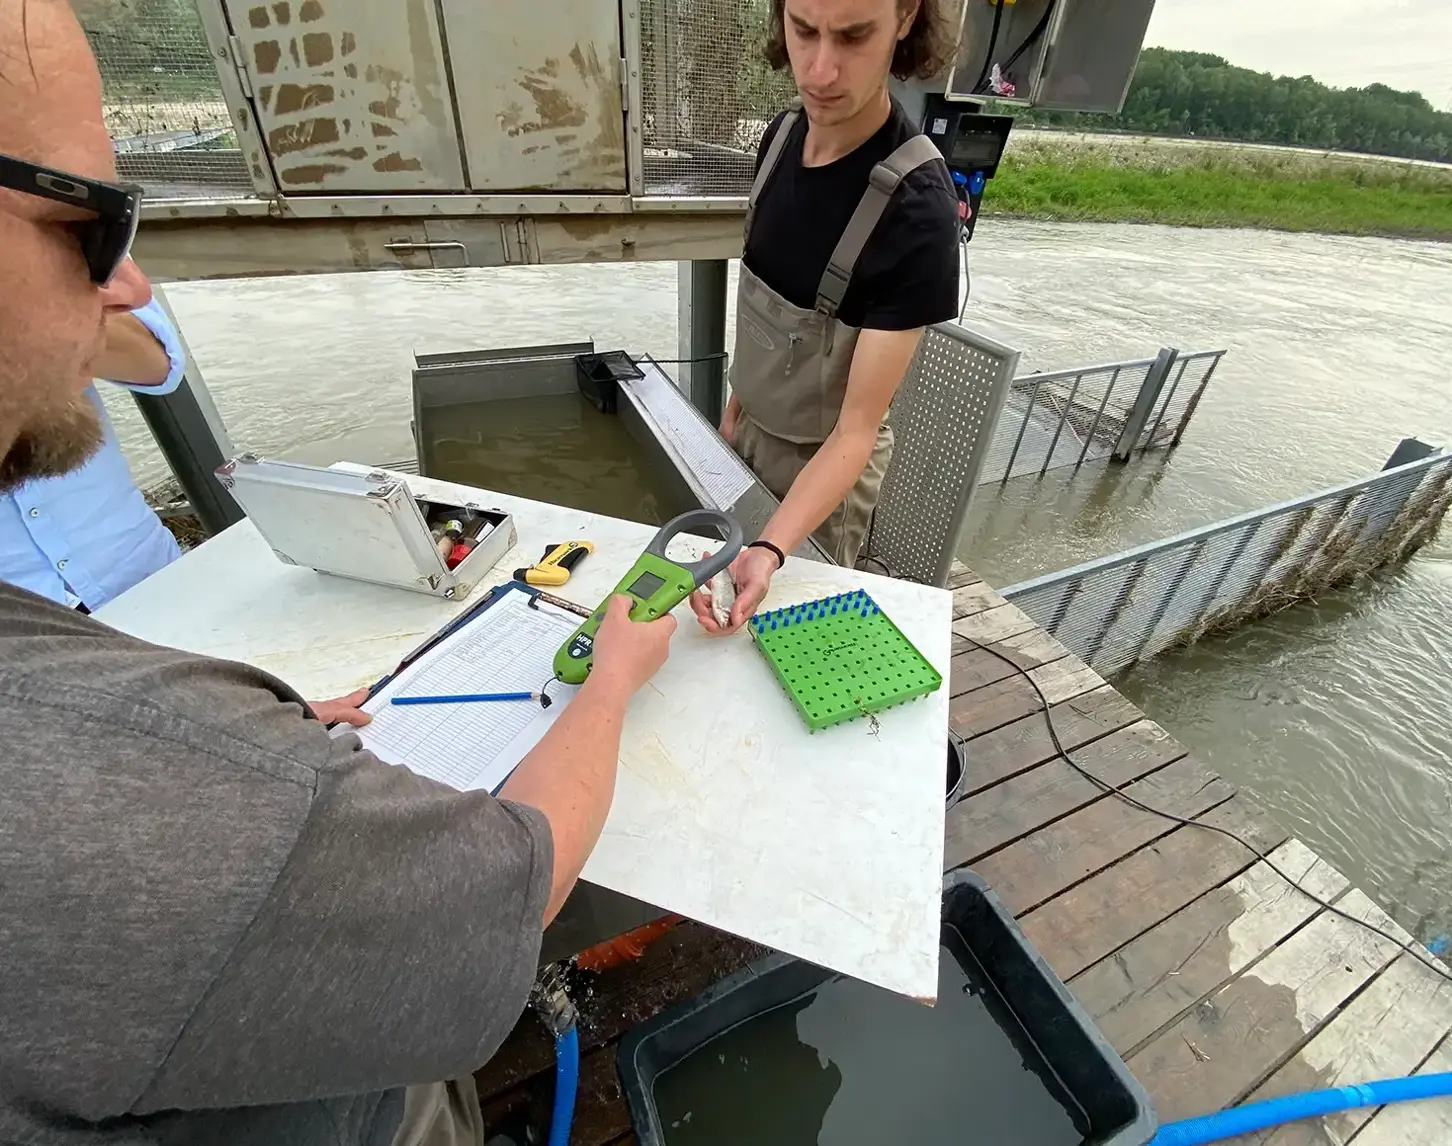 In spring, ecologists start counting fish in the new fish migration aid in Altenwörth.